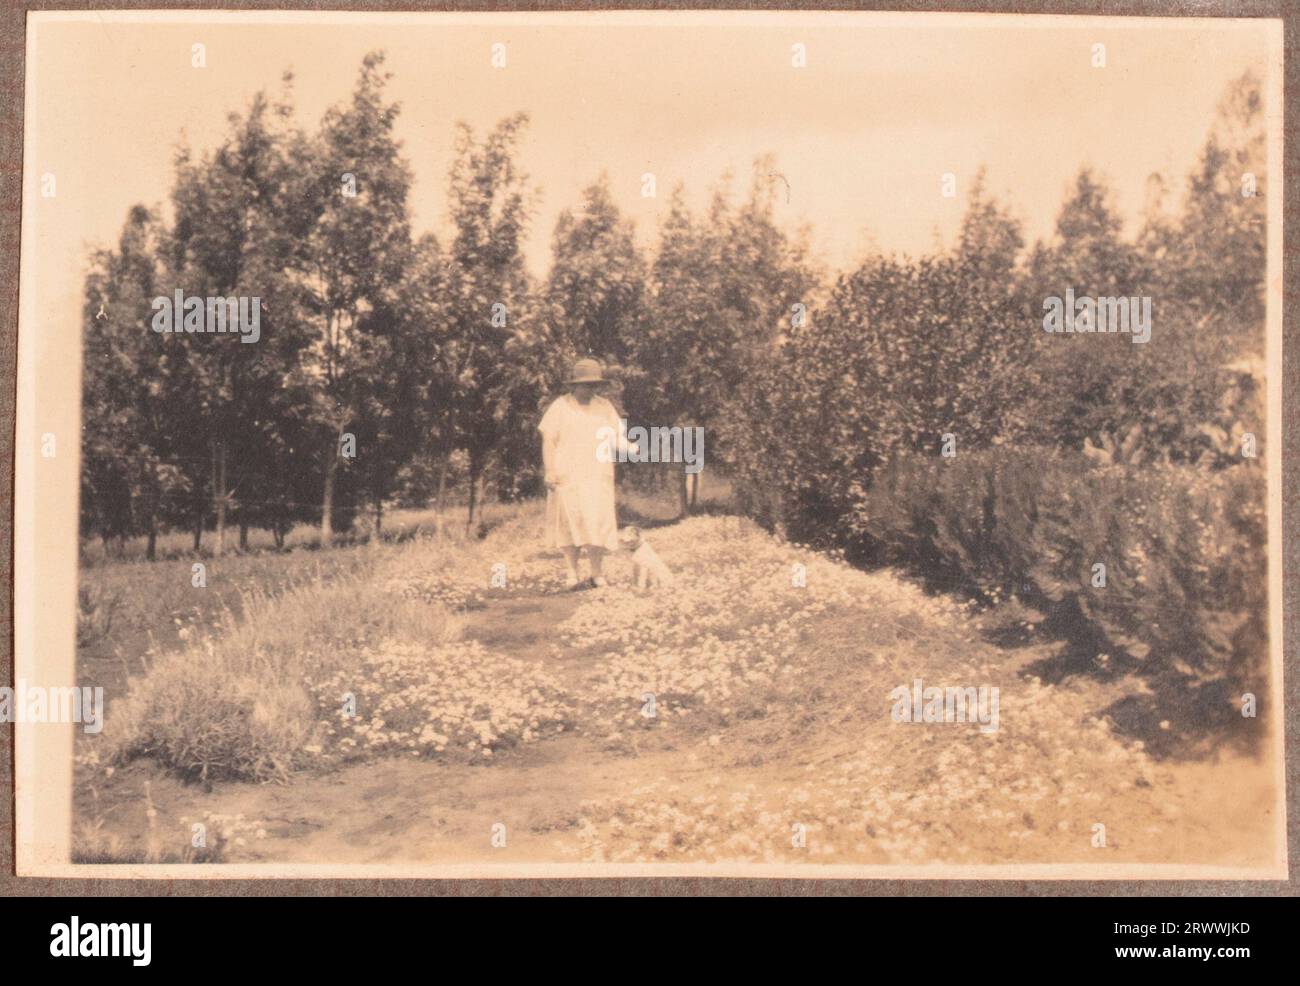 One of a series of photographs depicting the Bungeys' Christmas jollity in Machakos. May Bungey, dressed as a clown, with a European couple also in fancy dress, stands amongst the trees and wild flowers of their garden. Her companions include her brother-in-law William Walter. Original page caption: Xmas 1926 Machakos. Stock Photo